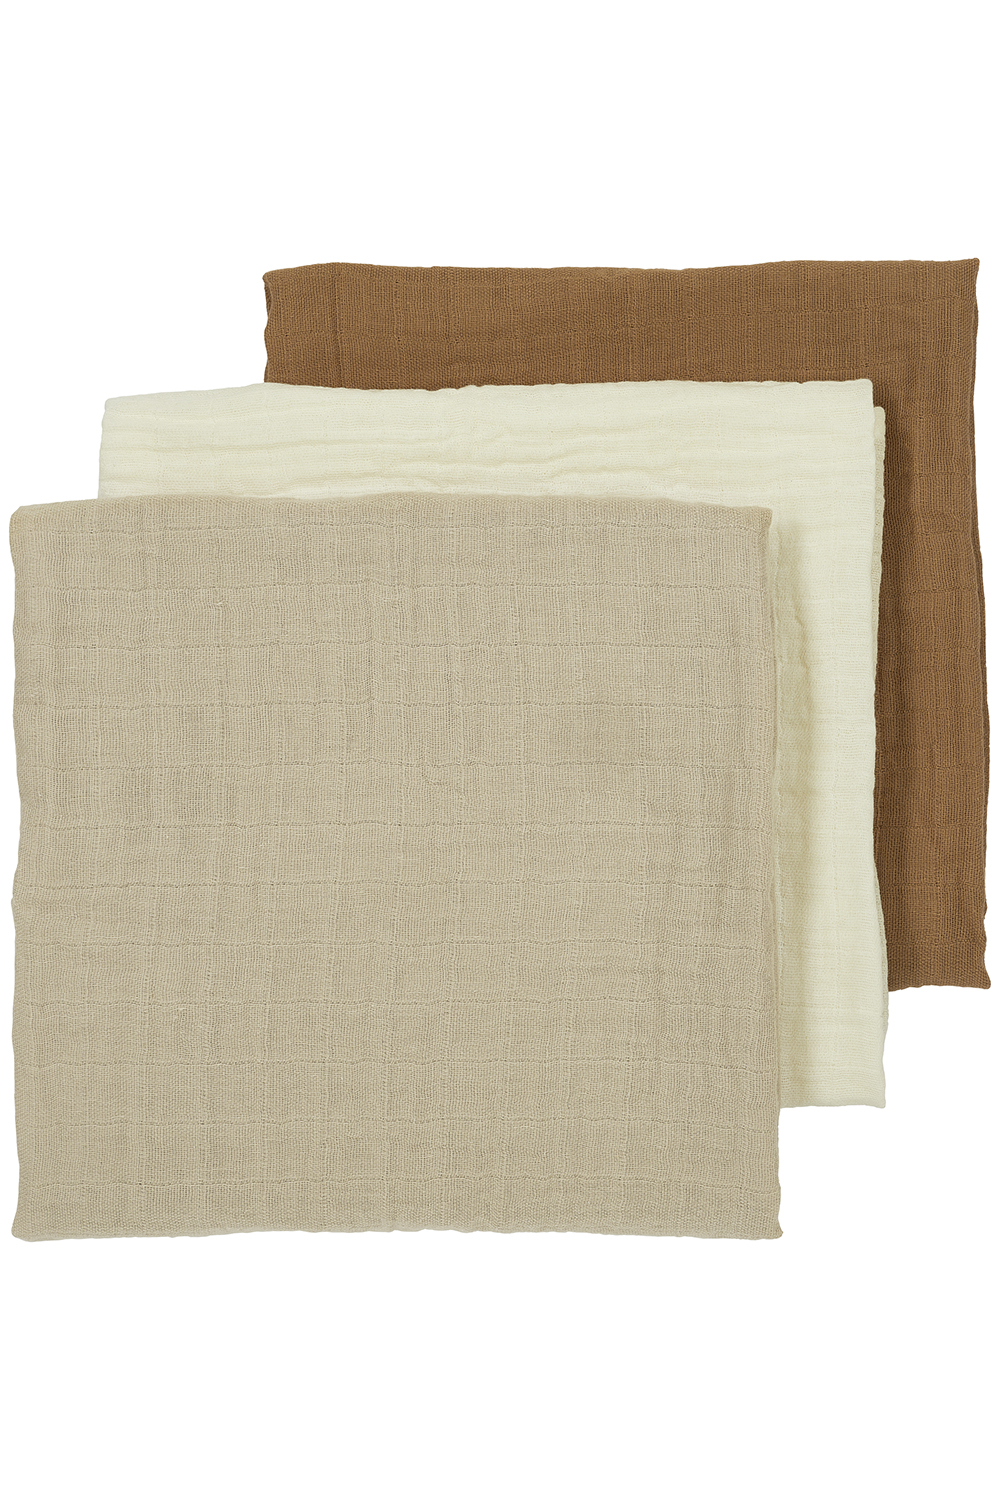 Mullwindeln 3er pack Uni - offwhite/sand/toffee - 70x70cm